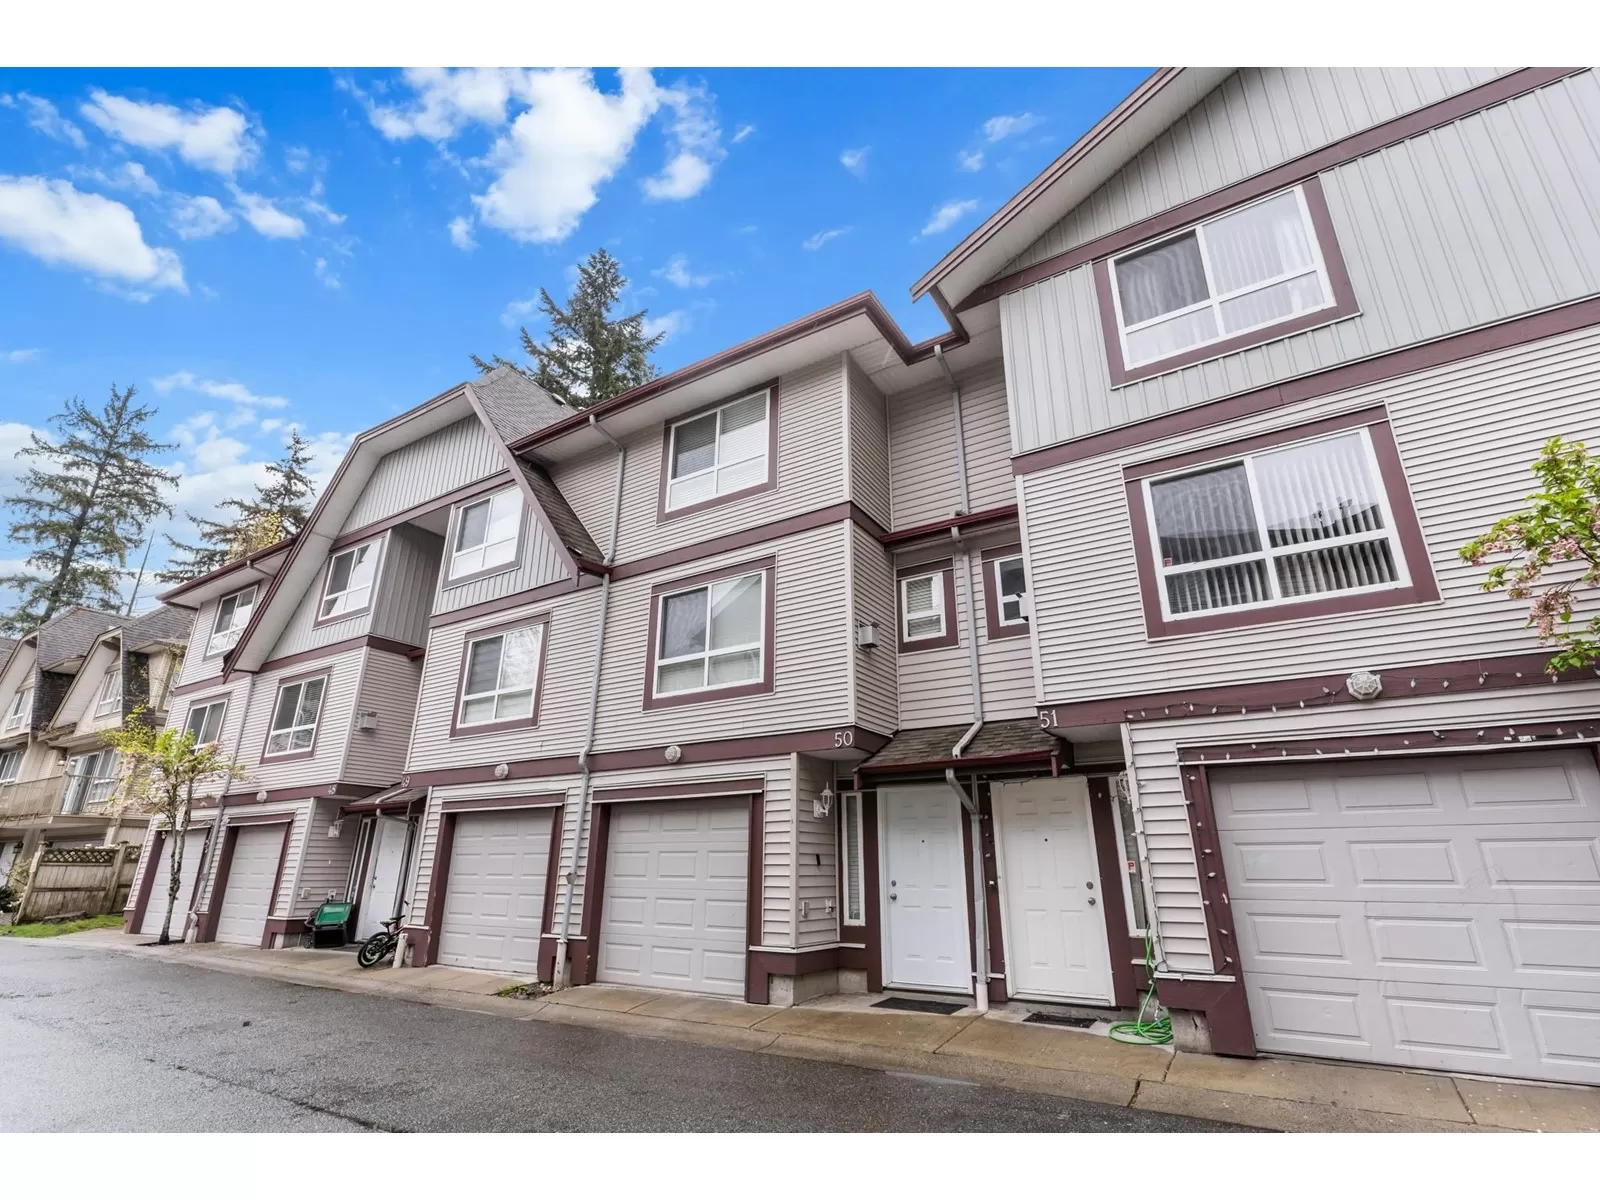 Row / Townhouse for rent: 50 12730 66 Avenue, Surrey, British Columbia V3W 1P3